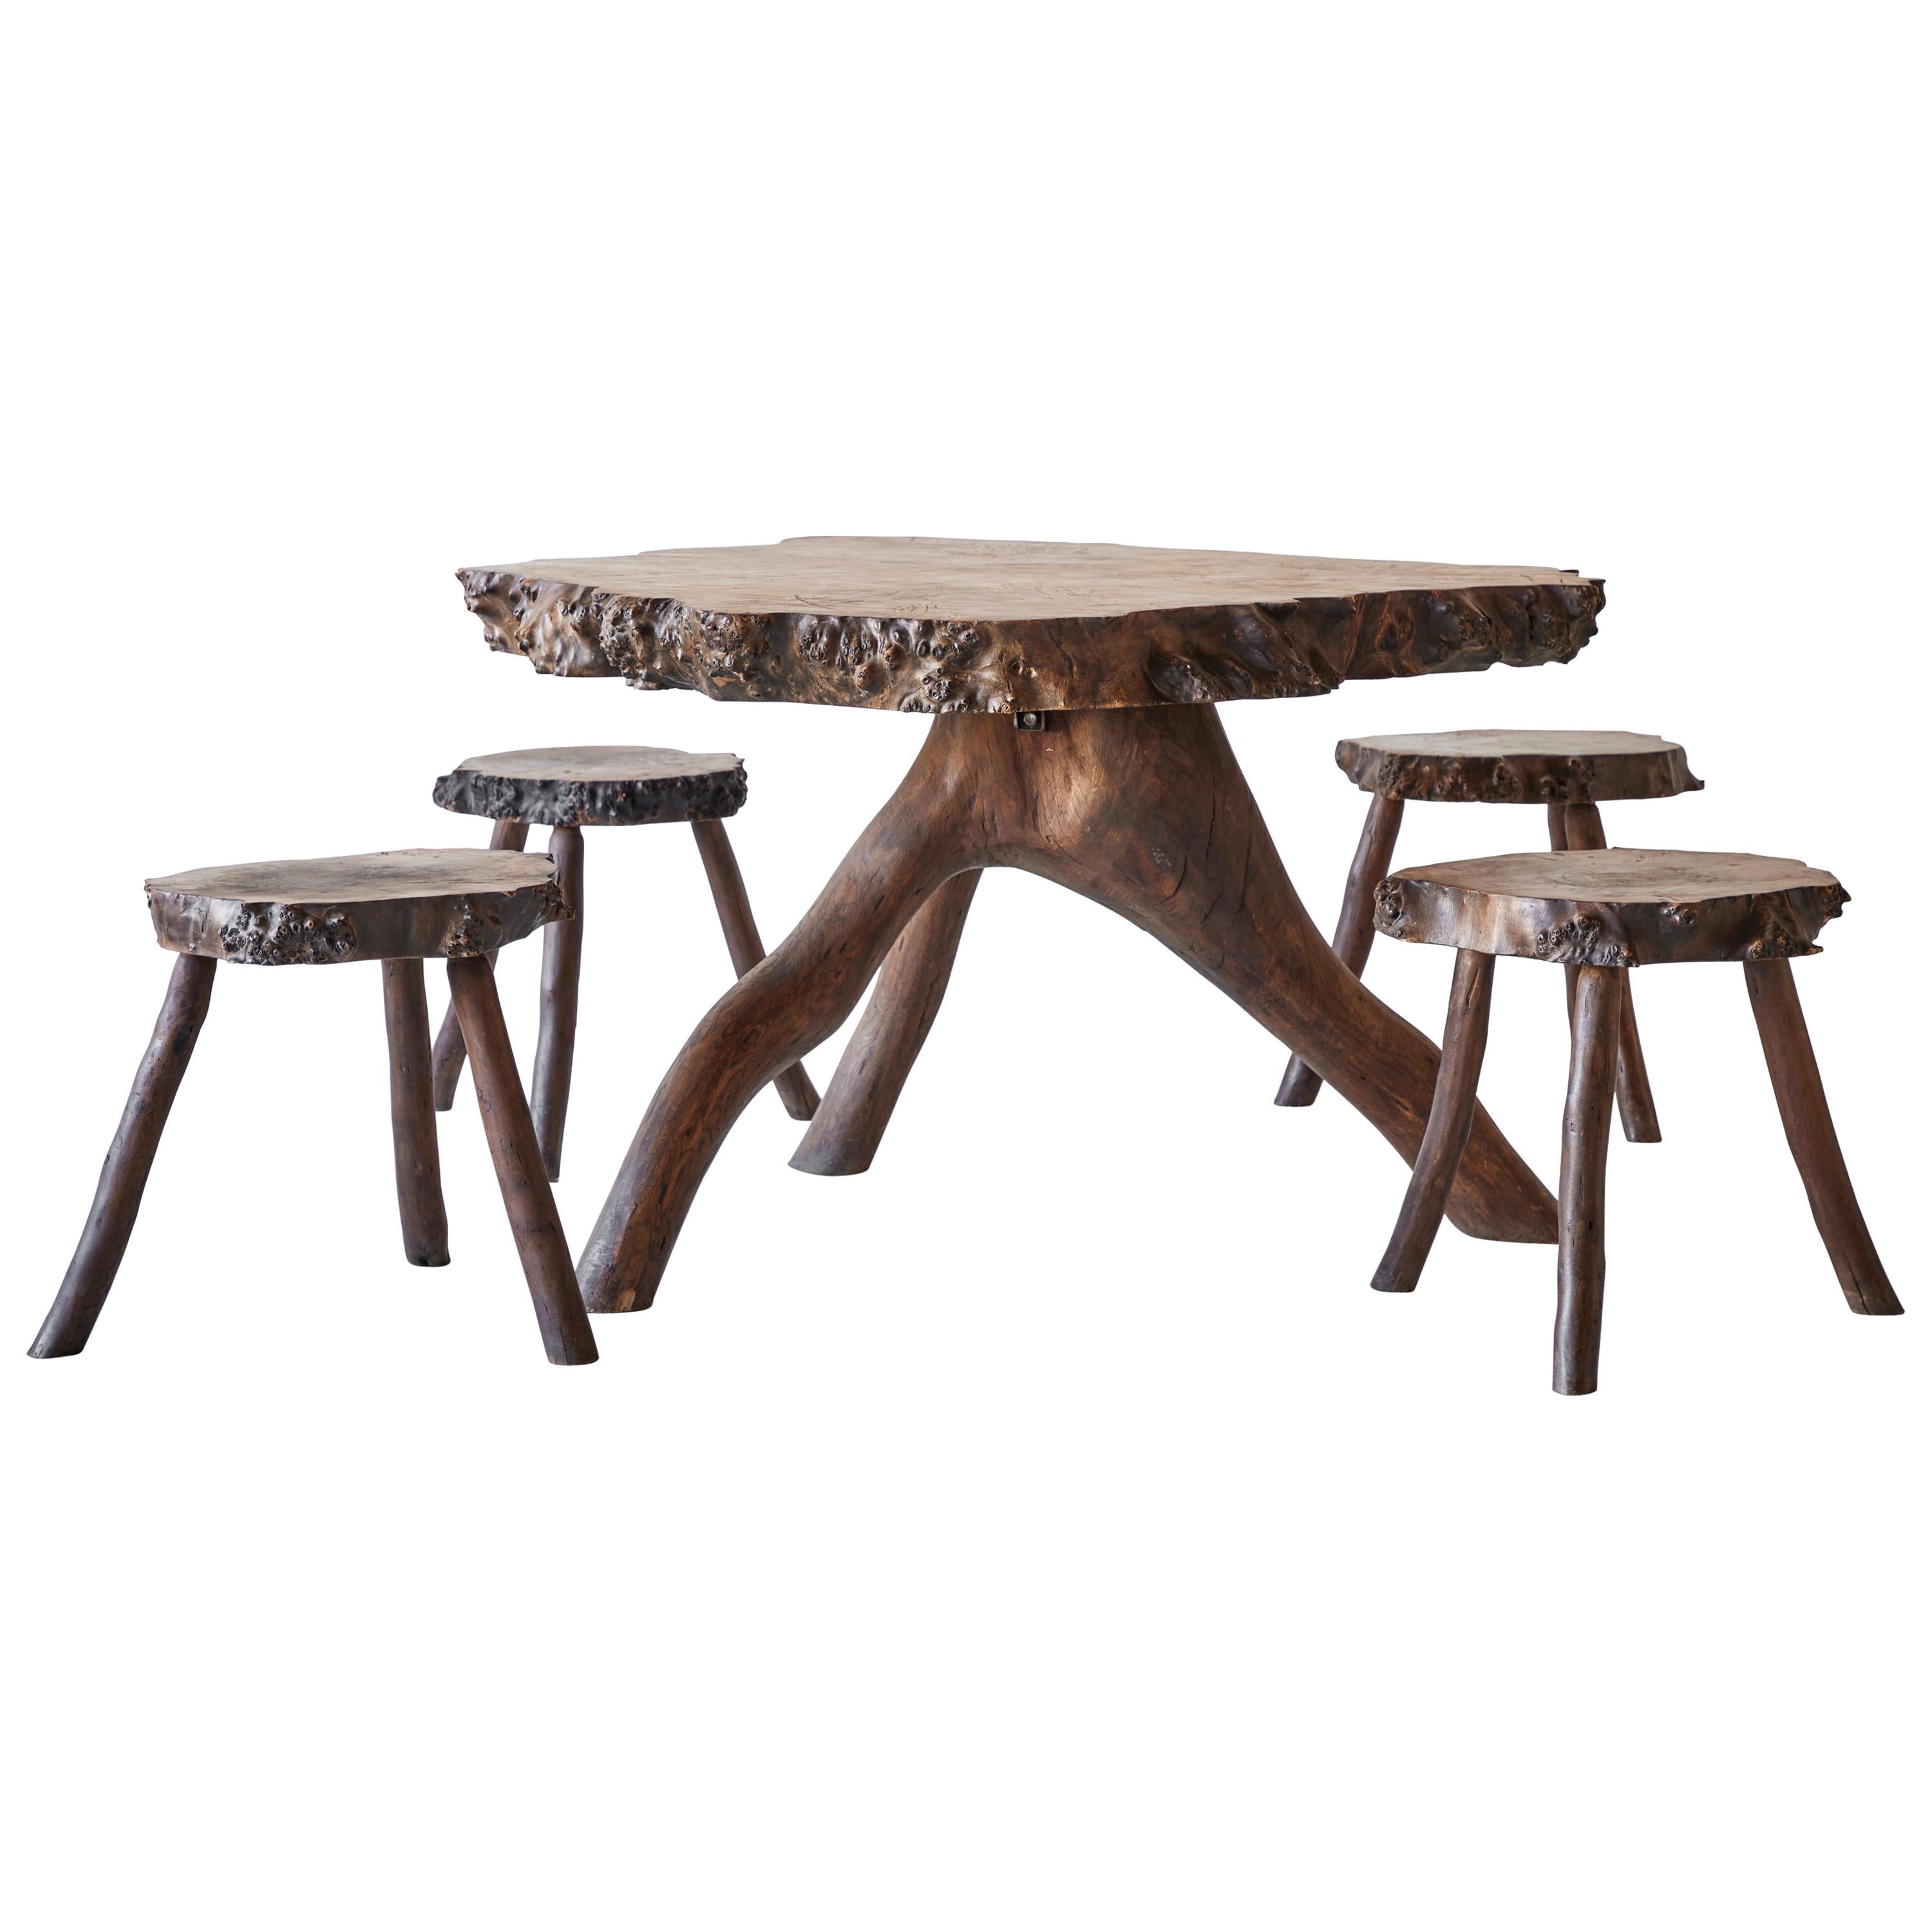 Rustic Root Table with Four Stools